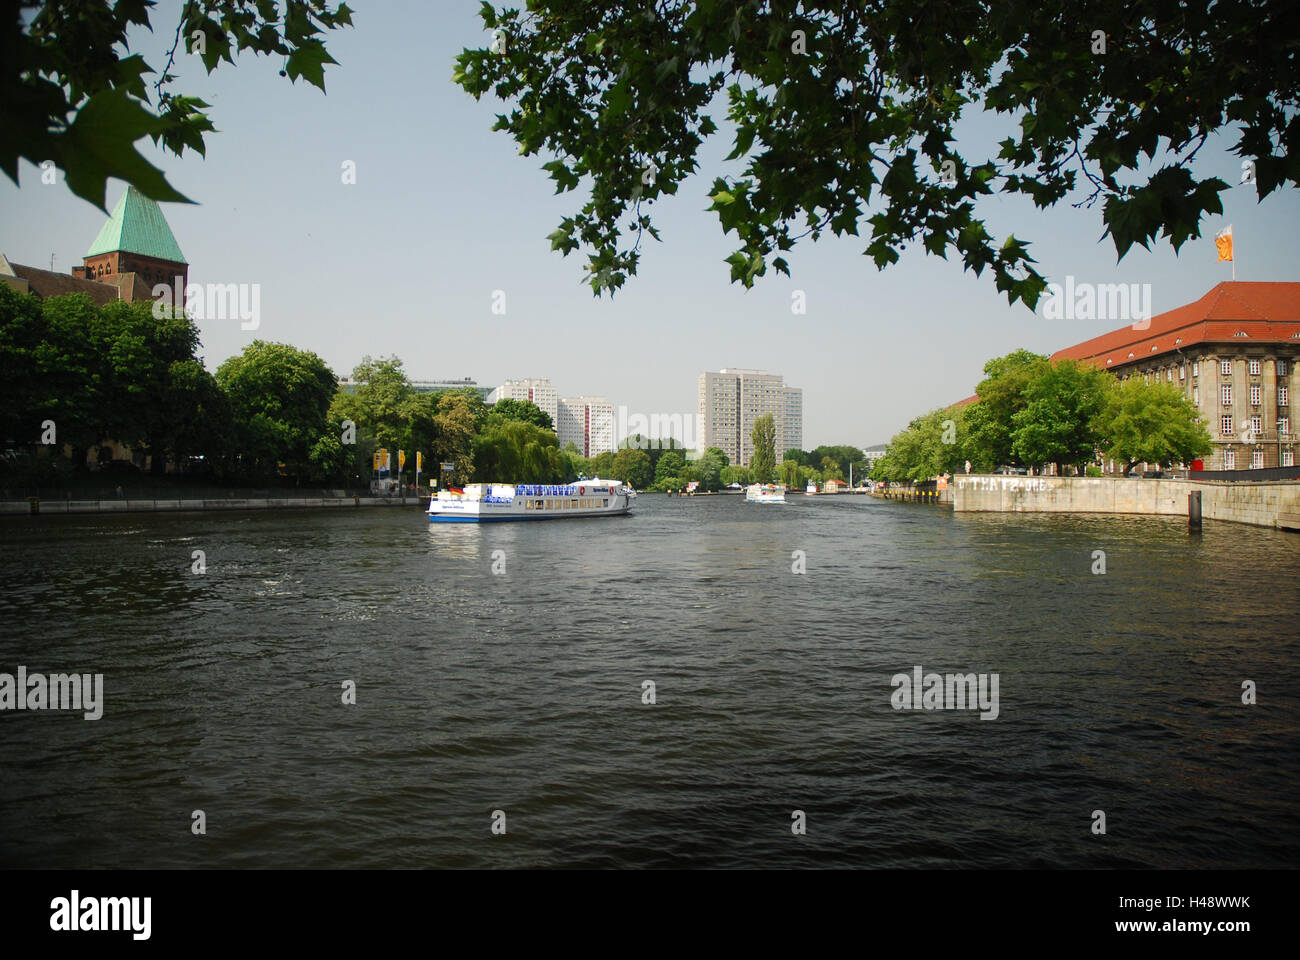 Germany, Berlin, Friedrich's grove, Spree shore, museum the Brandenburg March, capital, Berlin-Friedrich's grove, river, building, museum, the Spree, shore, riverside, boots, ships, excursion boats, tourism, Stock Photo